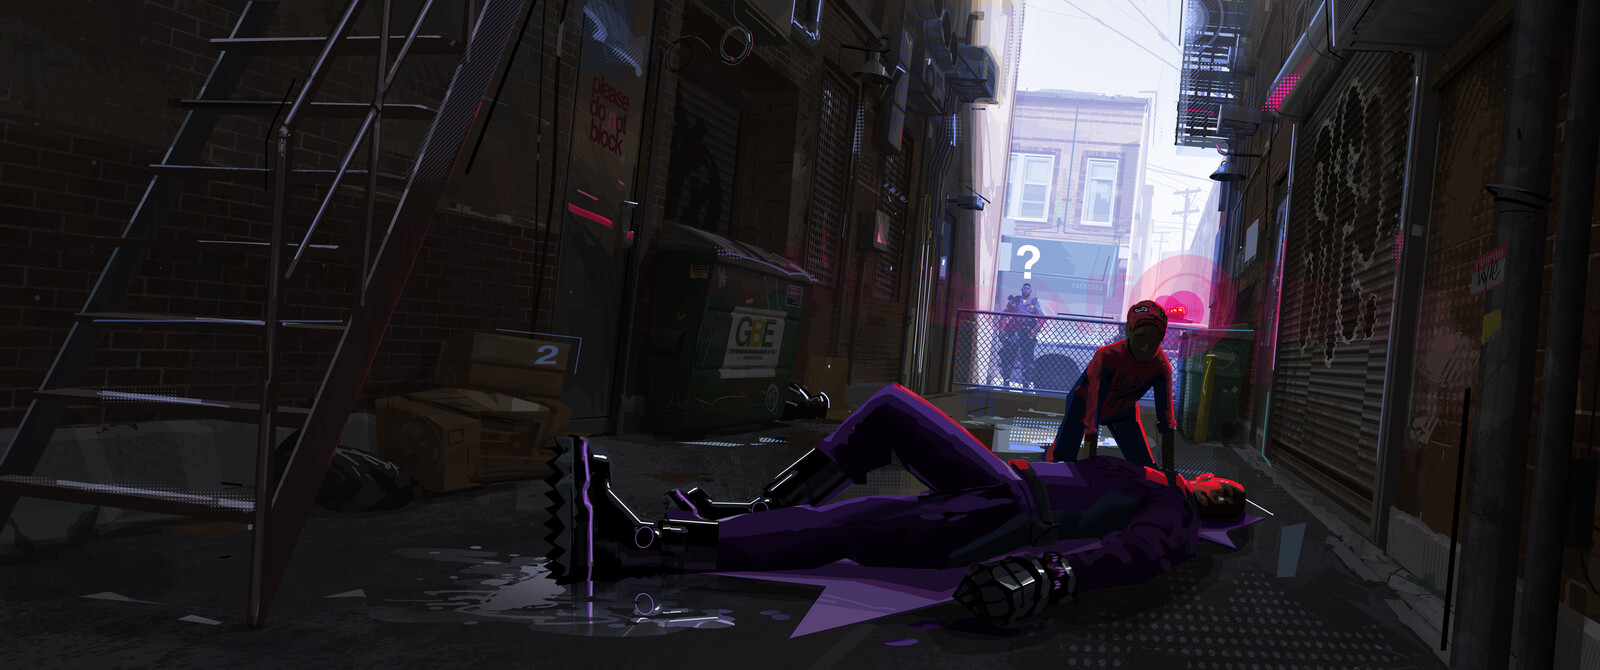 Spider-Man: Into the Spider-verse
Death of Prowler